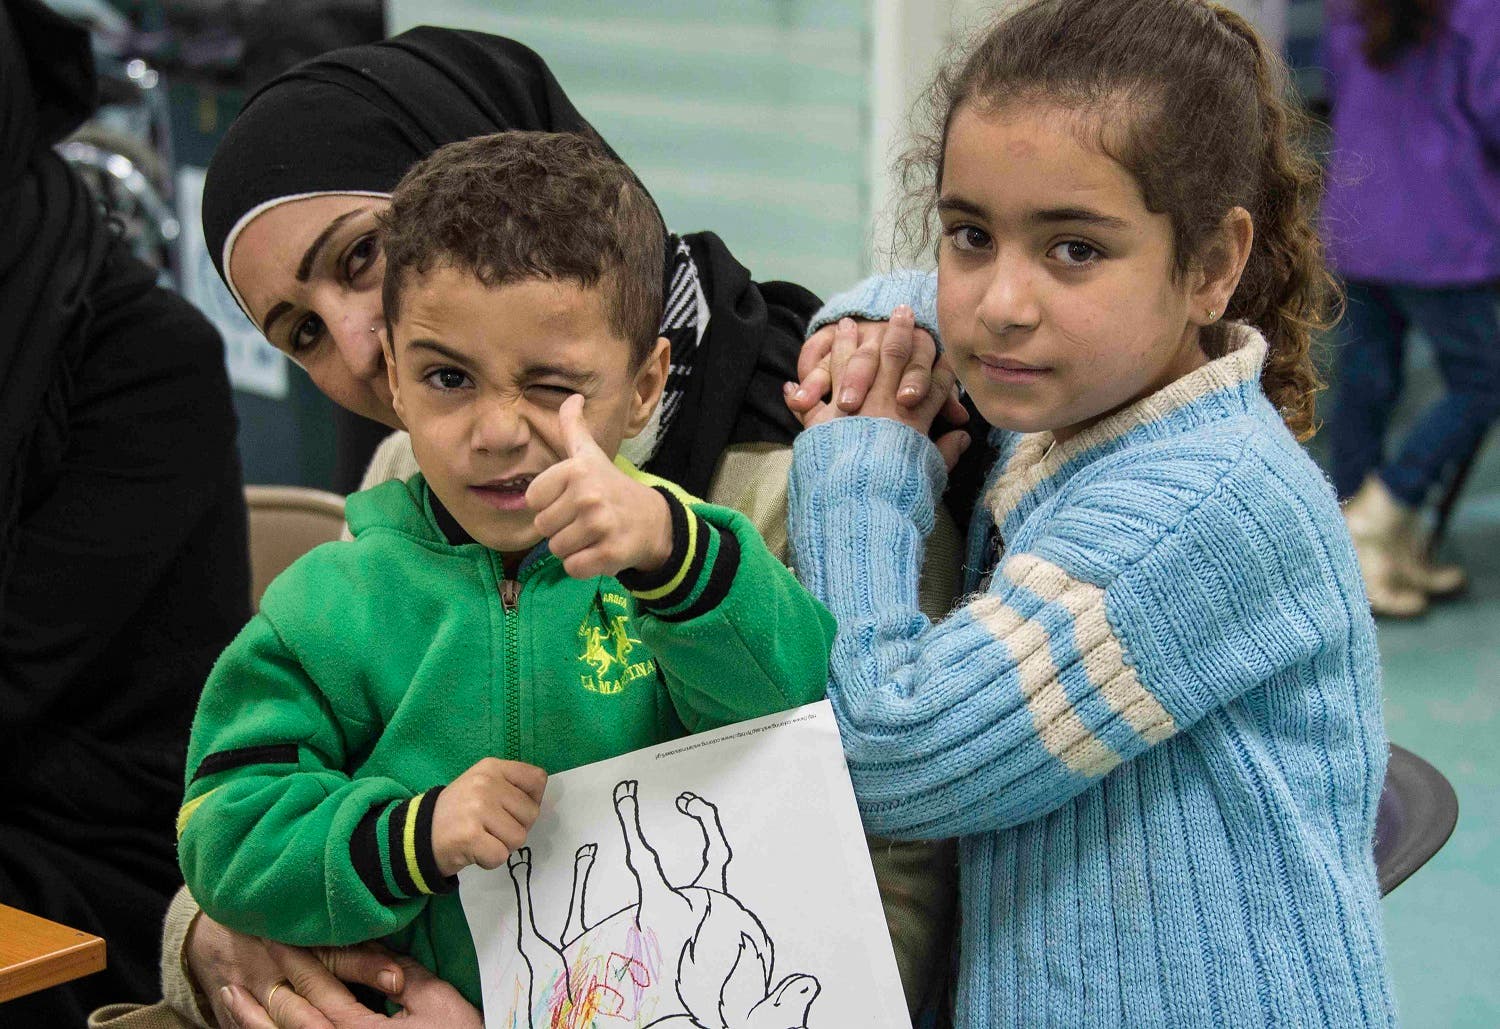 Two Syrian refugee children pose while their family undergoes medical screening before the beginning of an airlift to Canada, in Beirut. (Reuters)